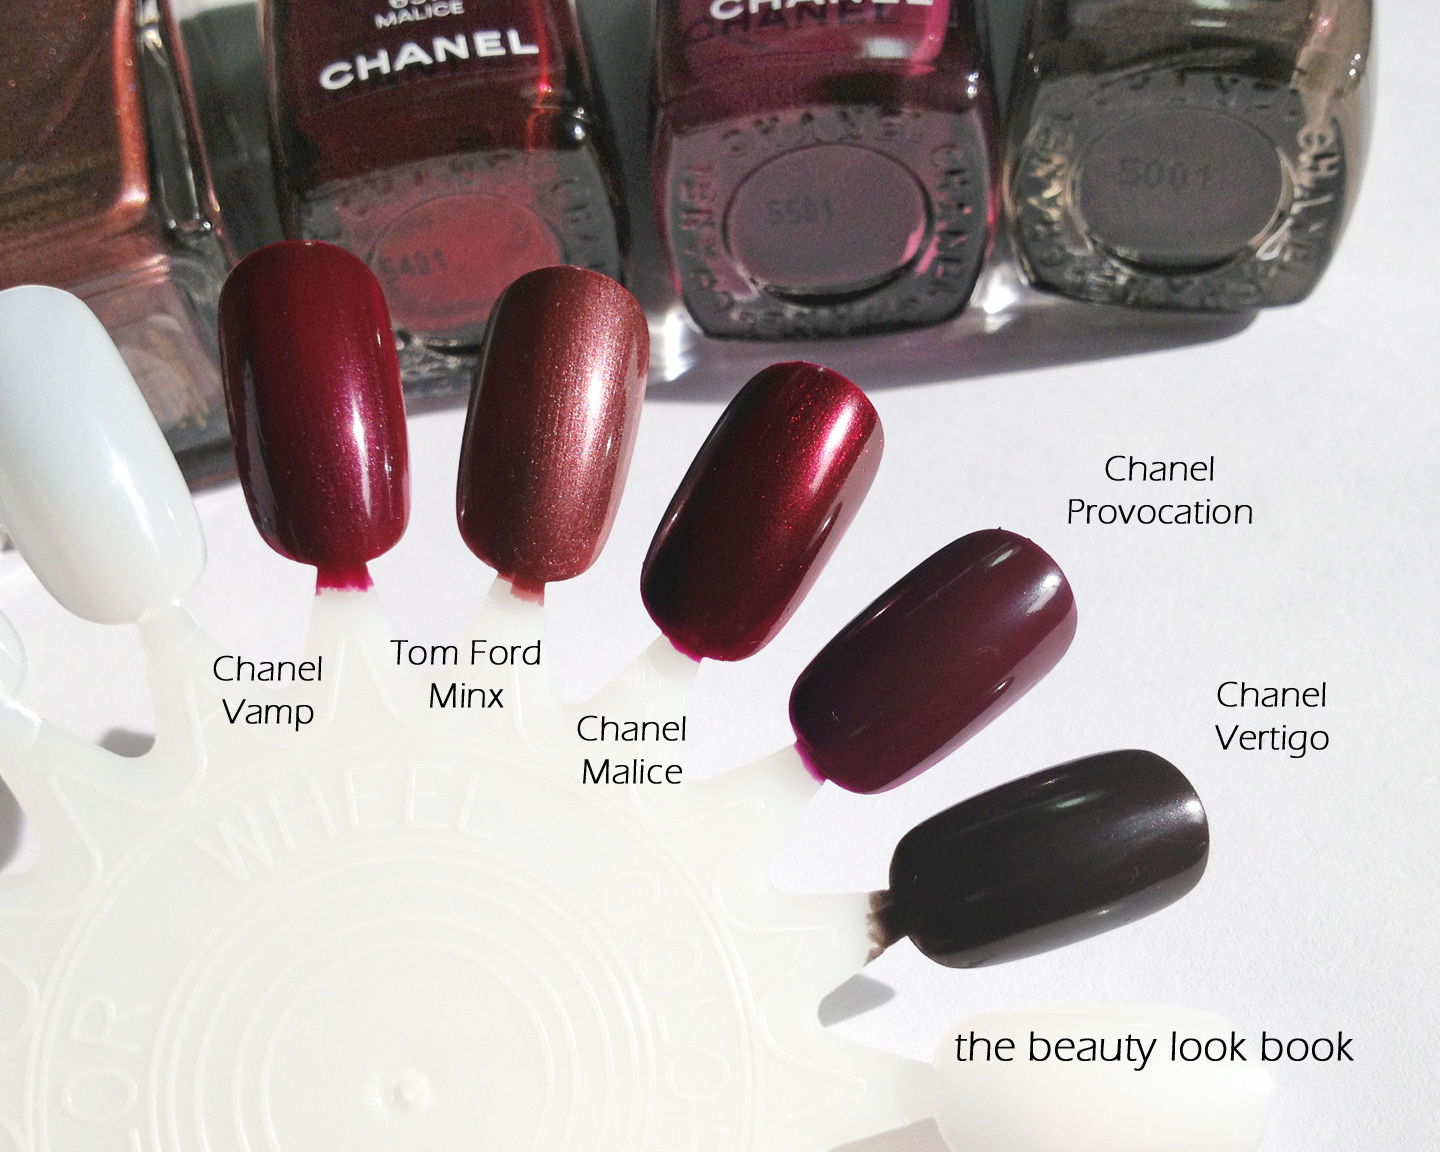 Chanel Le Vernis Longwear Nail Colour in Particuliere - wide 9